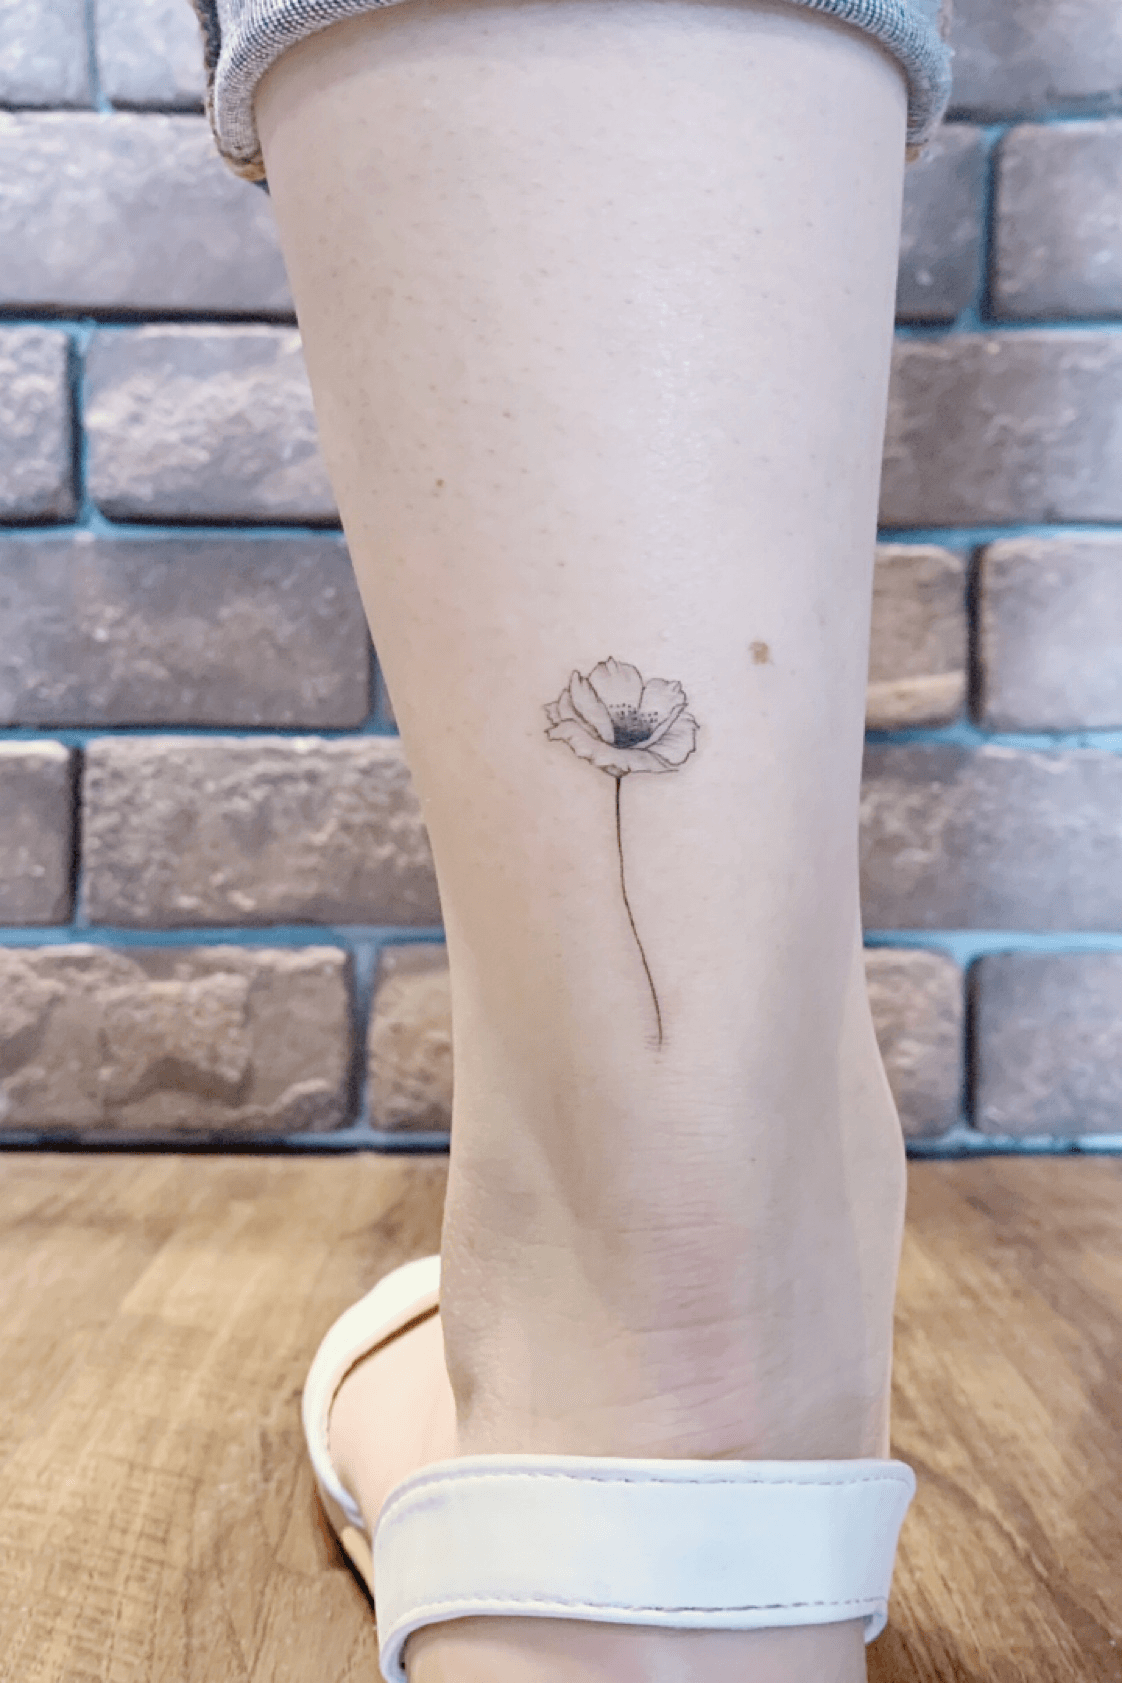 Blooming with Meaning 30 Daisy Tattoo Designs and Their Symbolism  100  Tattoos